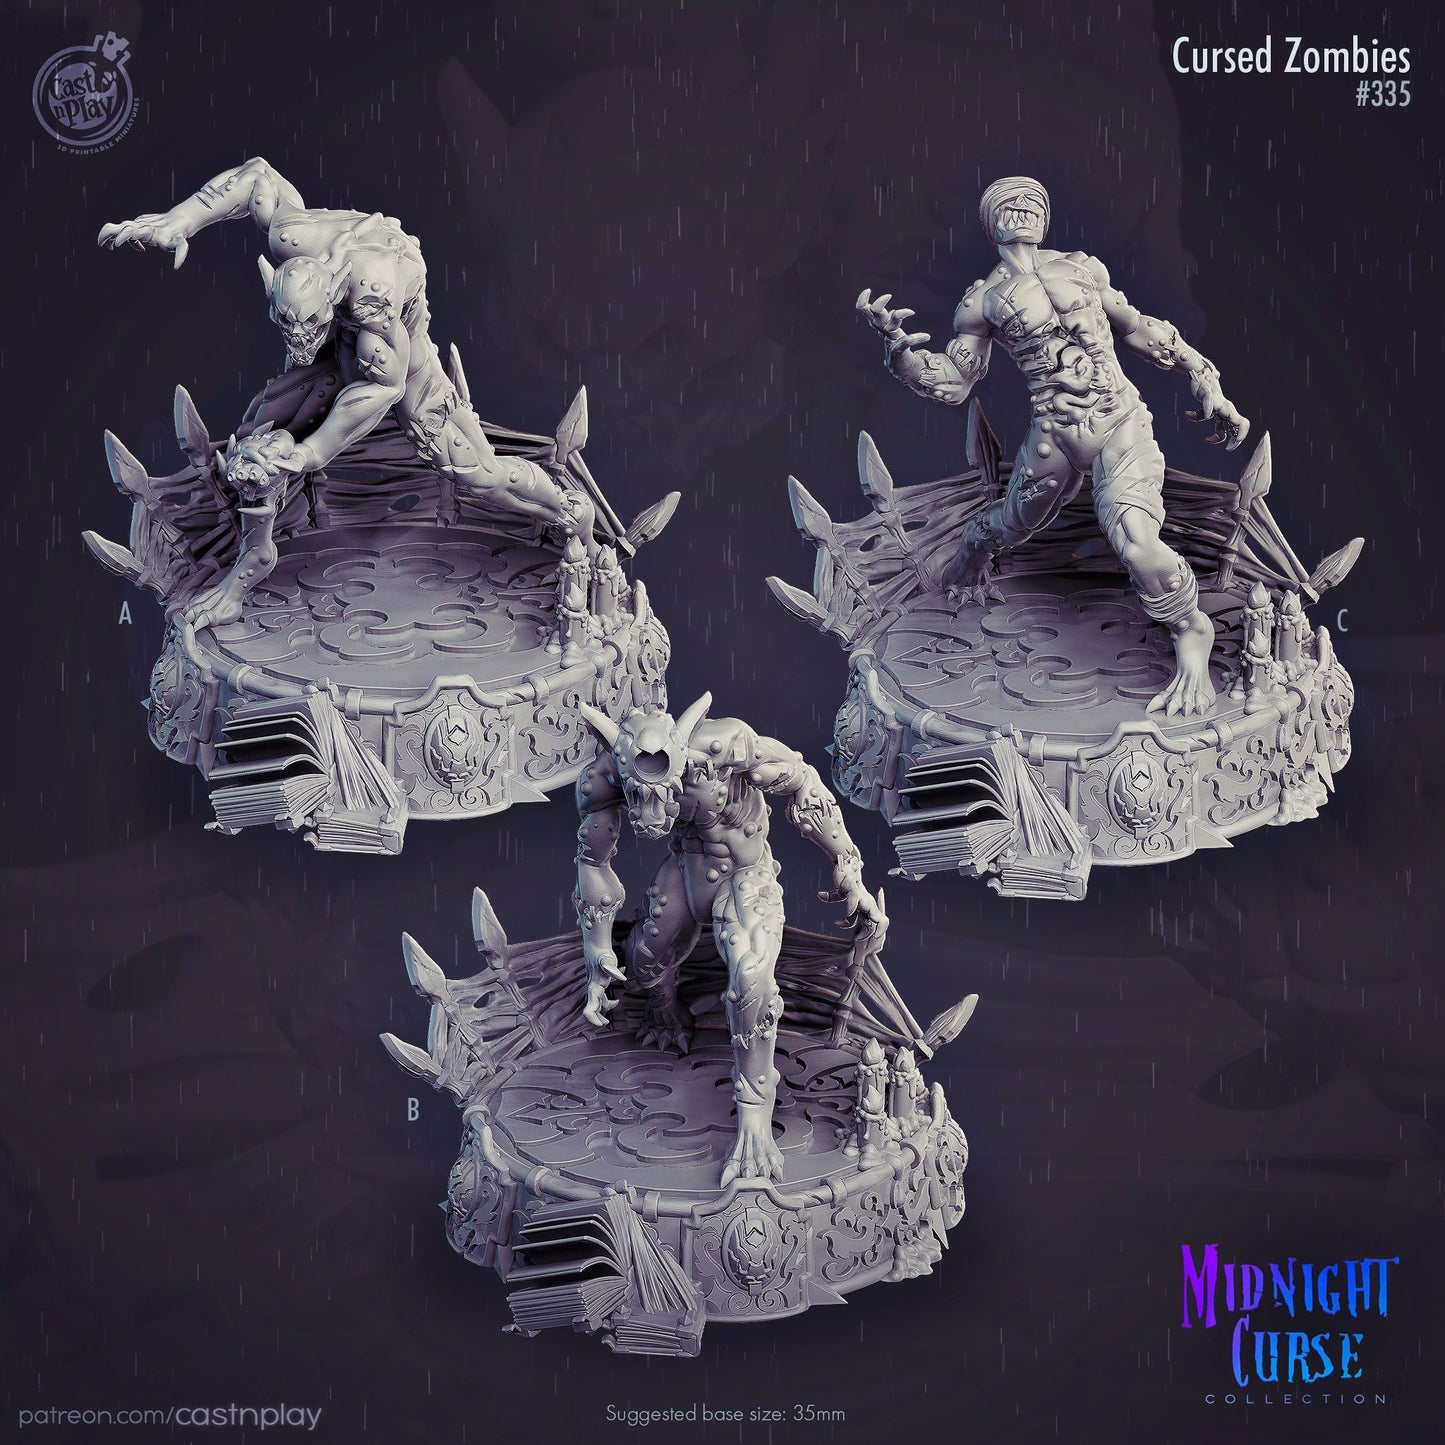 CURSED ZOMBIES, by Cast n Play // 3D Print on Demand / D&D / Pathfinder / RPG